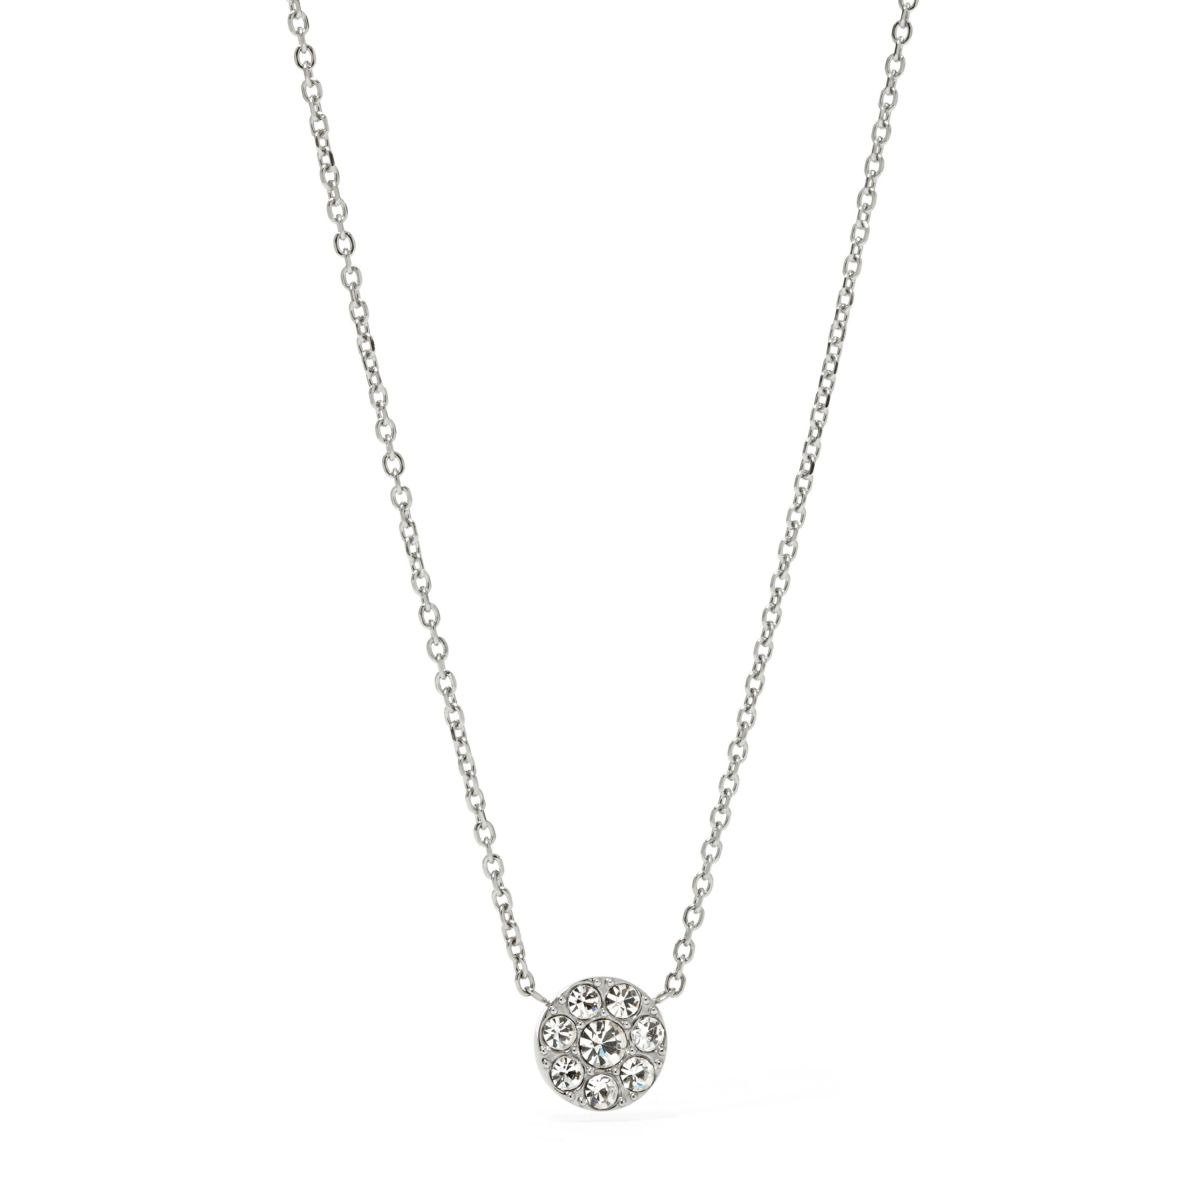 Fossil - Women's Necklace - Silver - Watch Shop GOOFASH